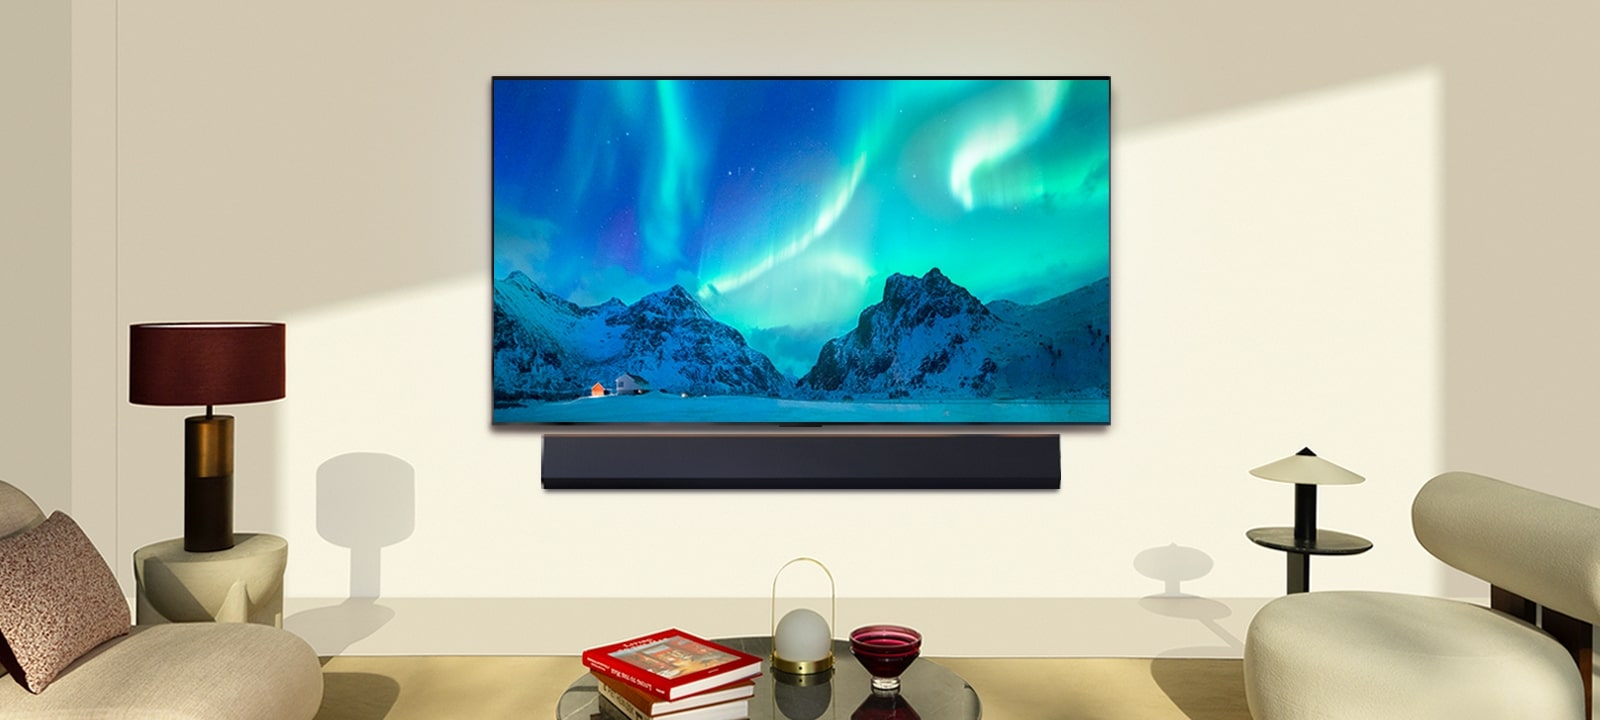 LG OLED TV and LG Soundbar in a modern living space in daytime. The screen image of the aurora borealis is displayed with the ideal brightness levels.	